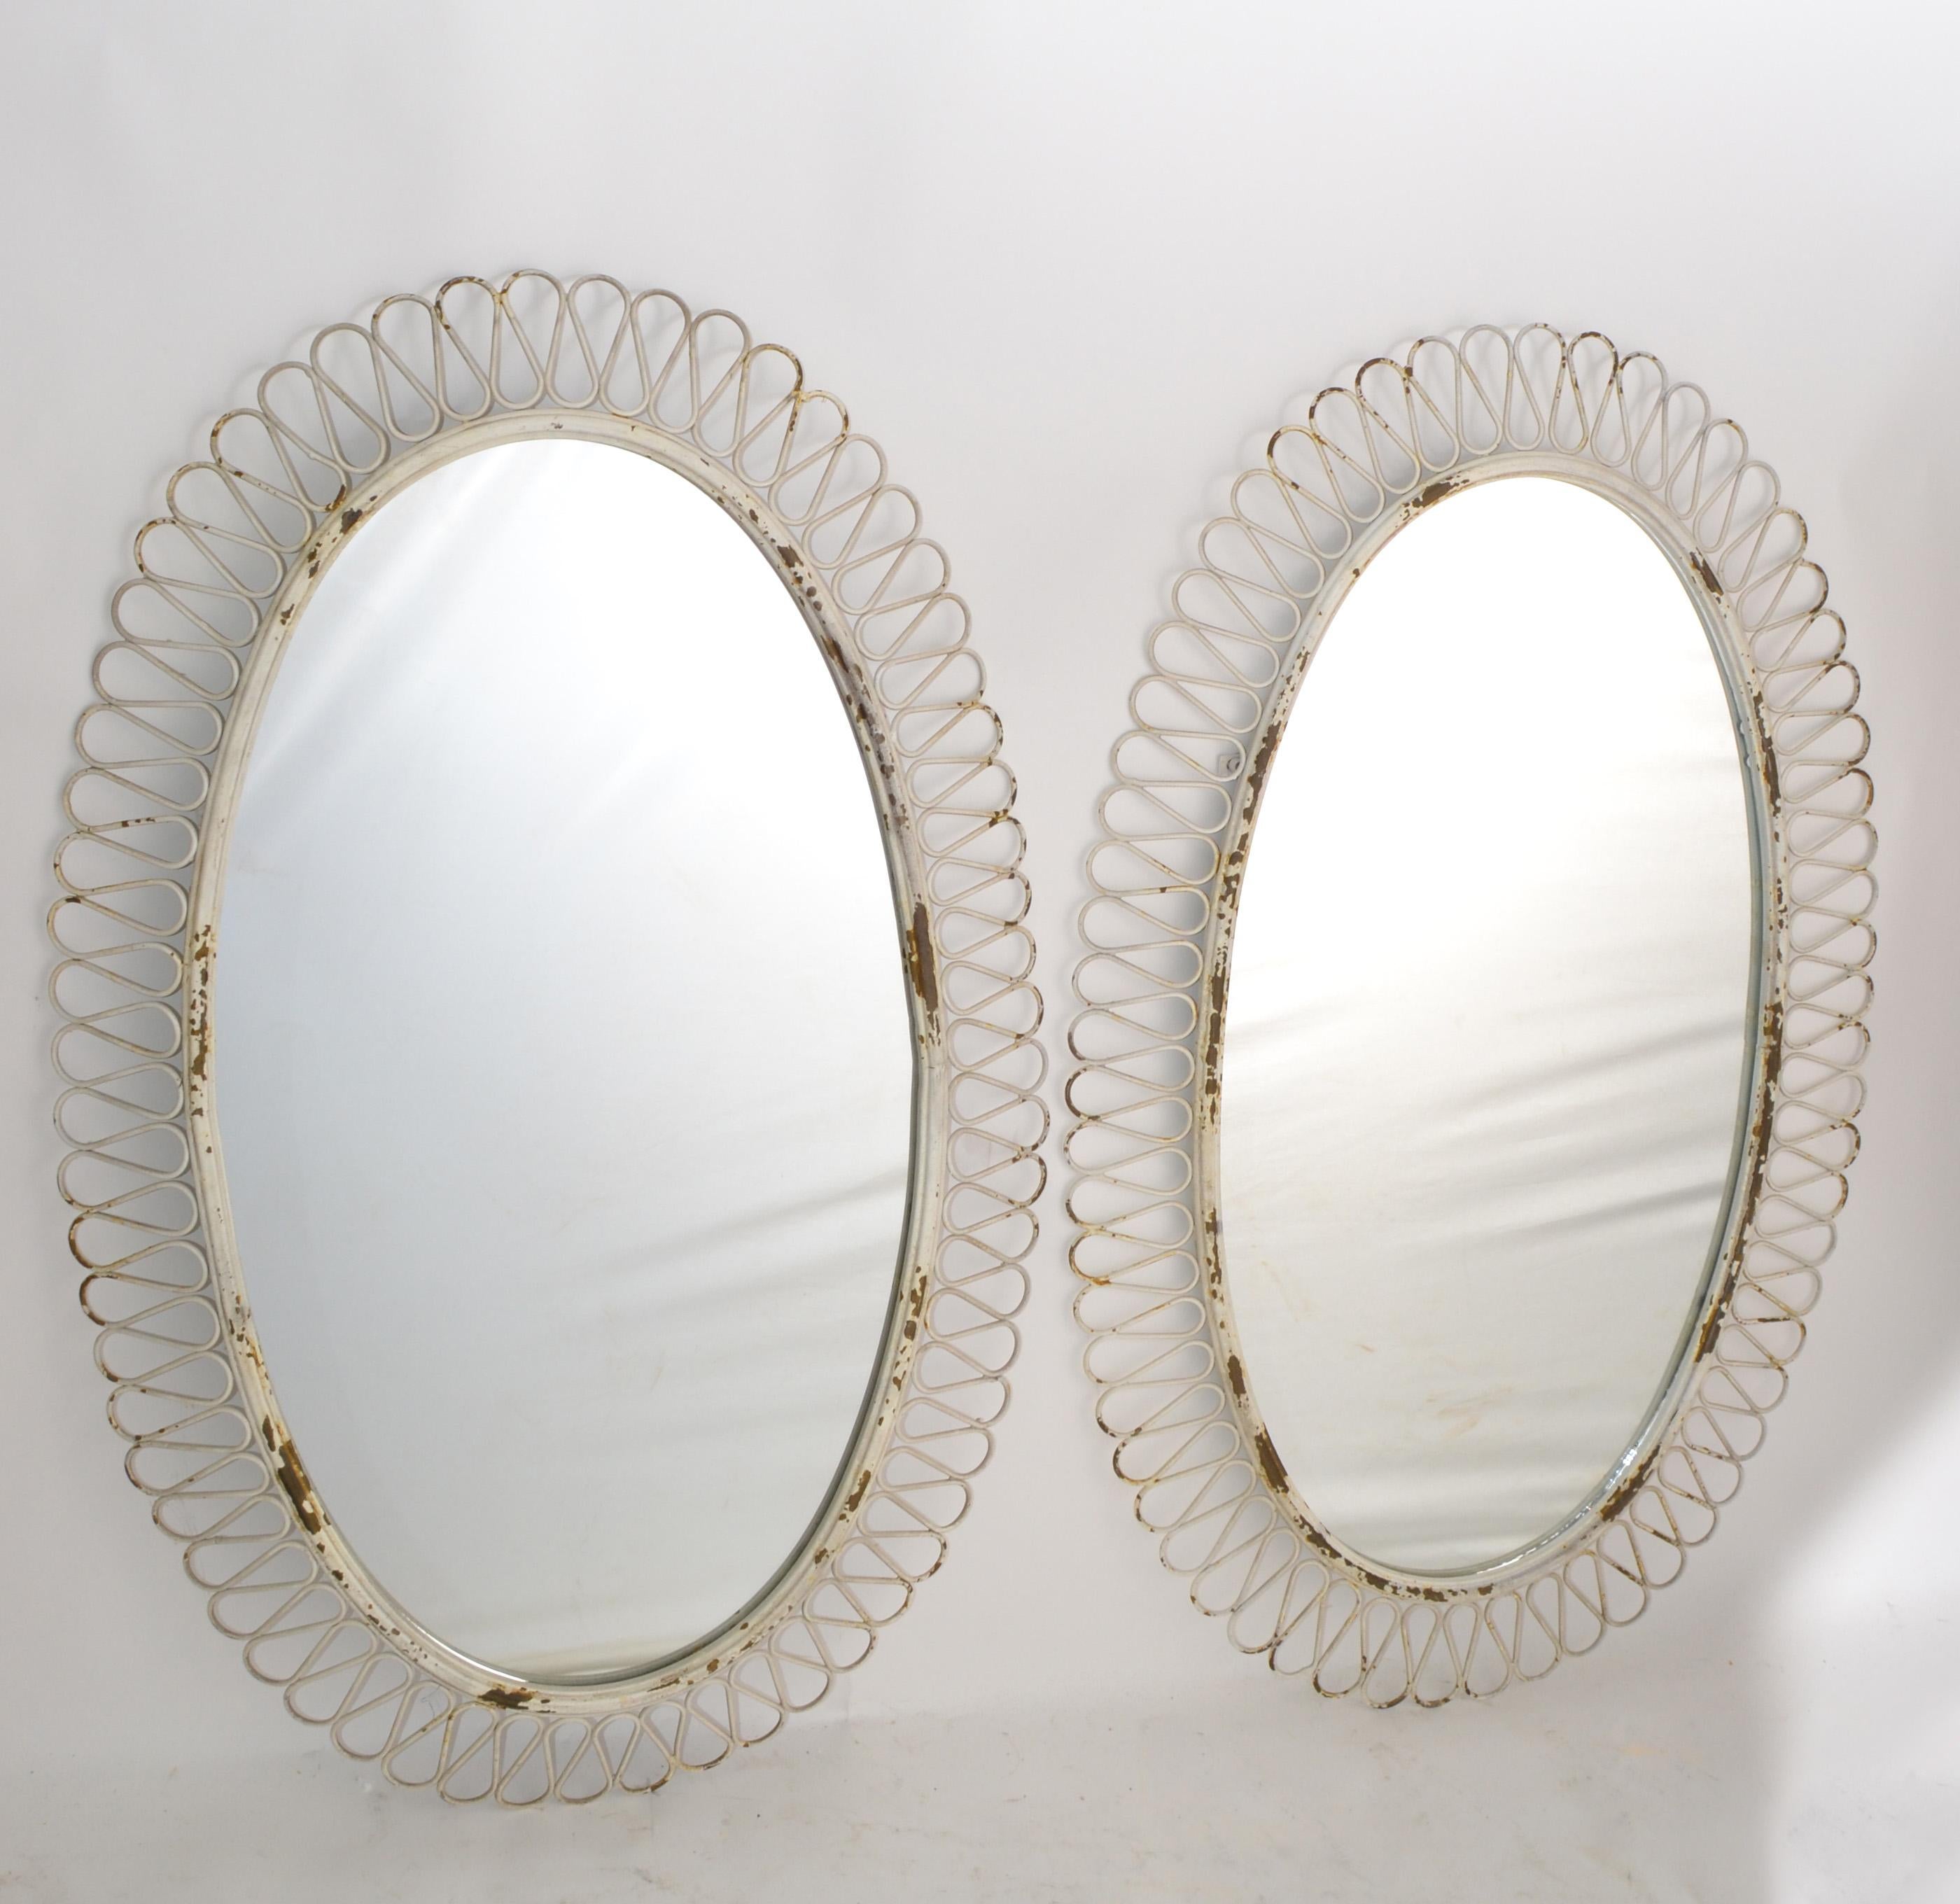 Mid-Century Modern Pair of French Oval Wrought Iron Wall Mirror Antique White distressed Look, 1950